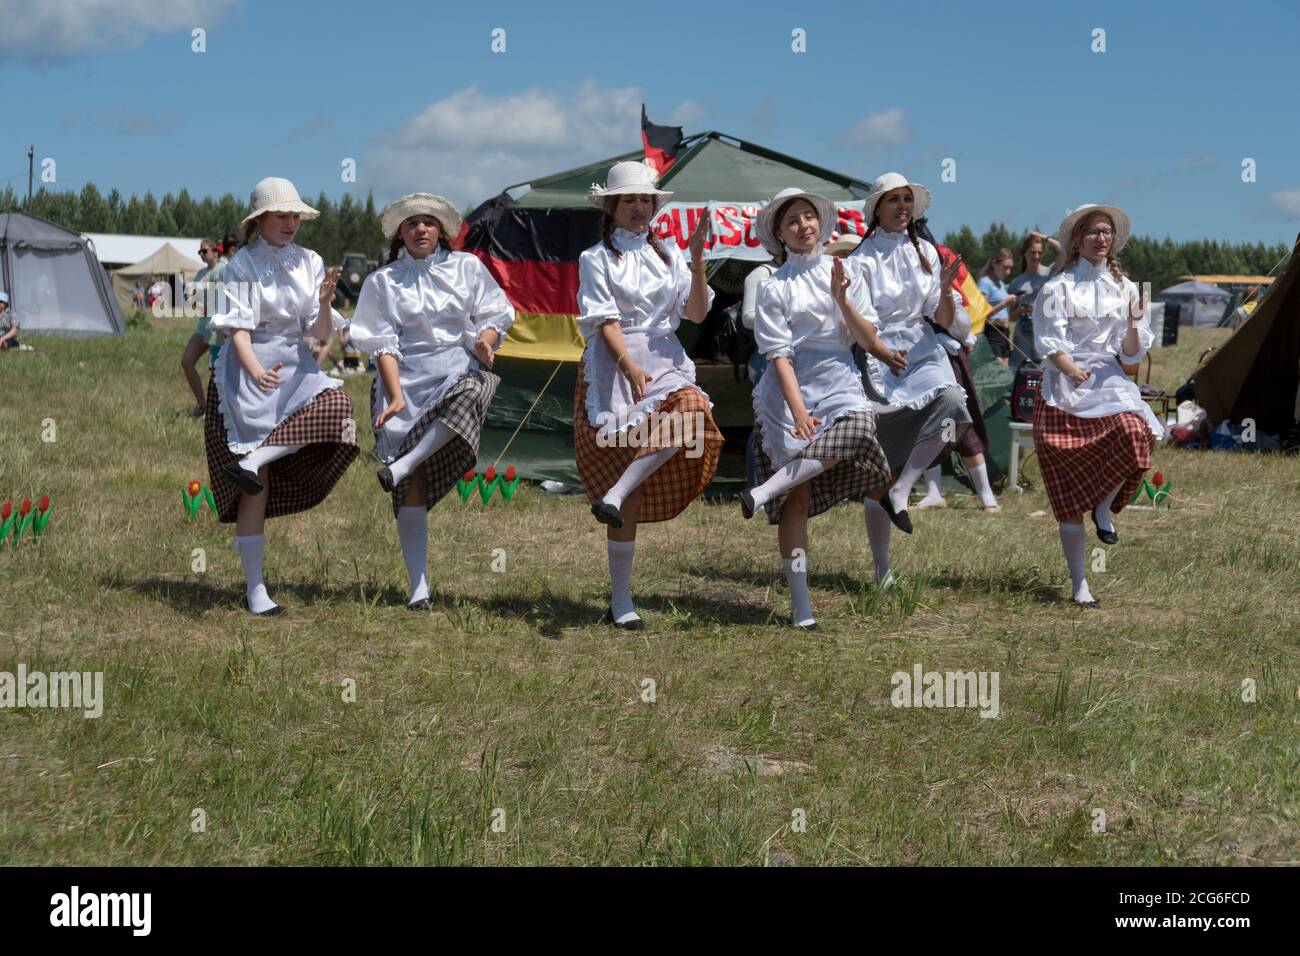 Girls dressed as German Frau dancing on the grass  during the ethnic festival Karatag on the shore of a Large lake. Stock Photo